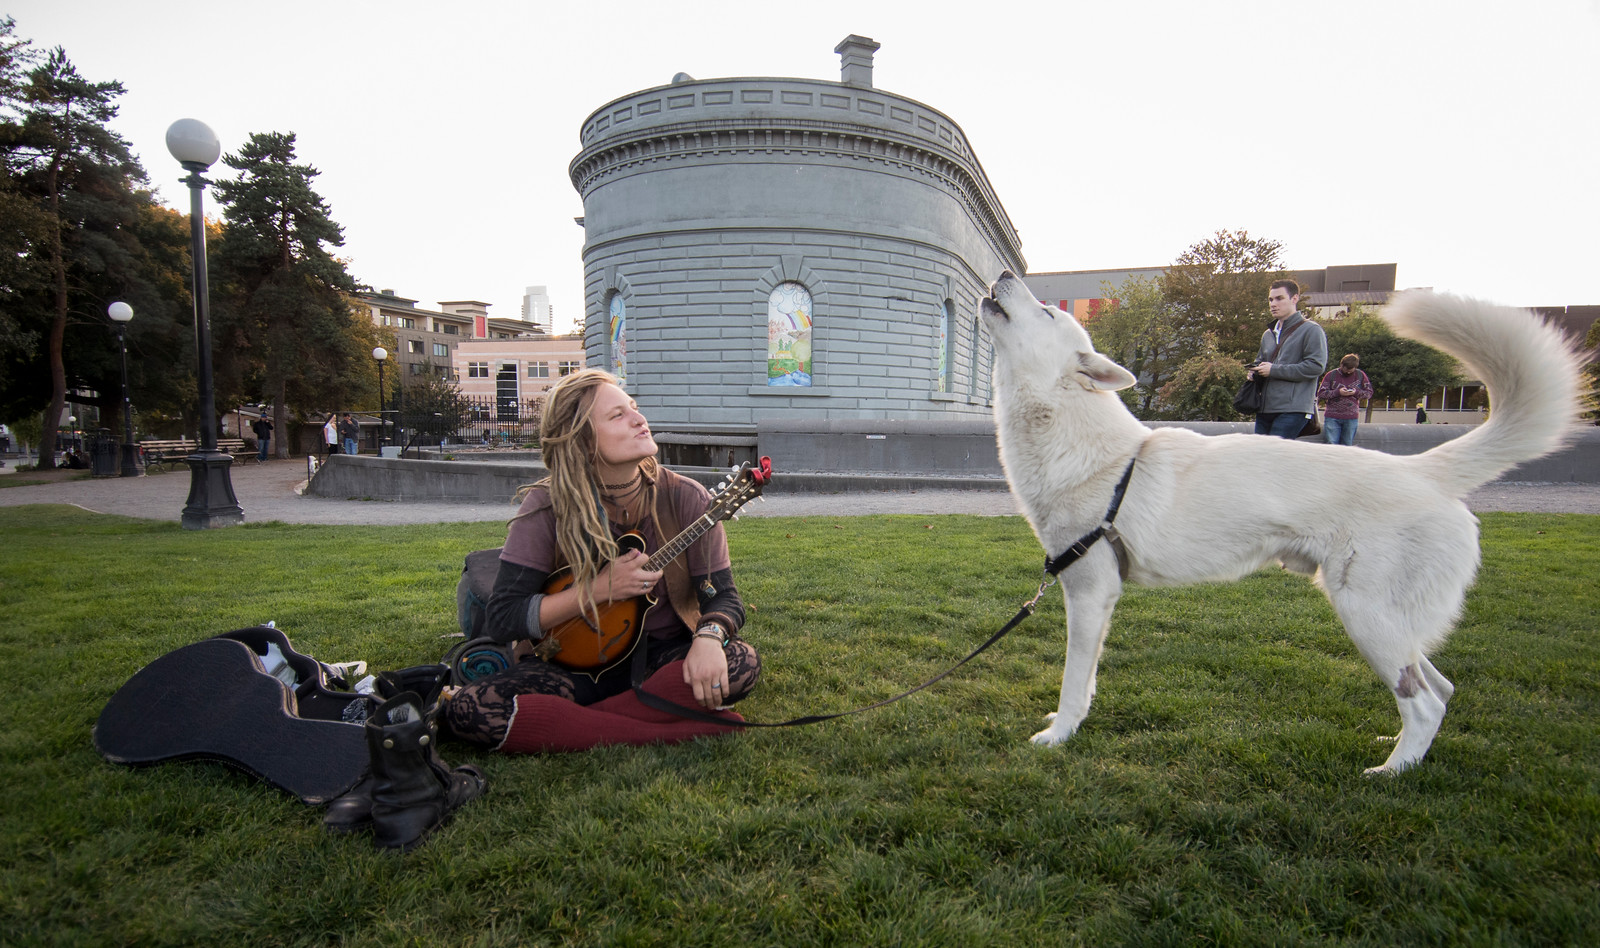 a guitar player with long hear sings along with her white dog at Cal Anderson Park